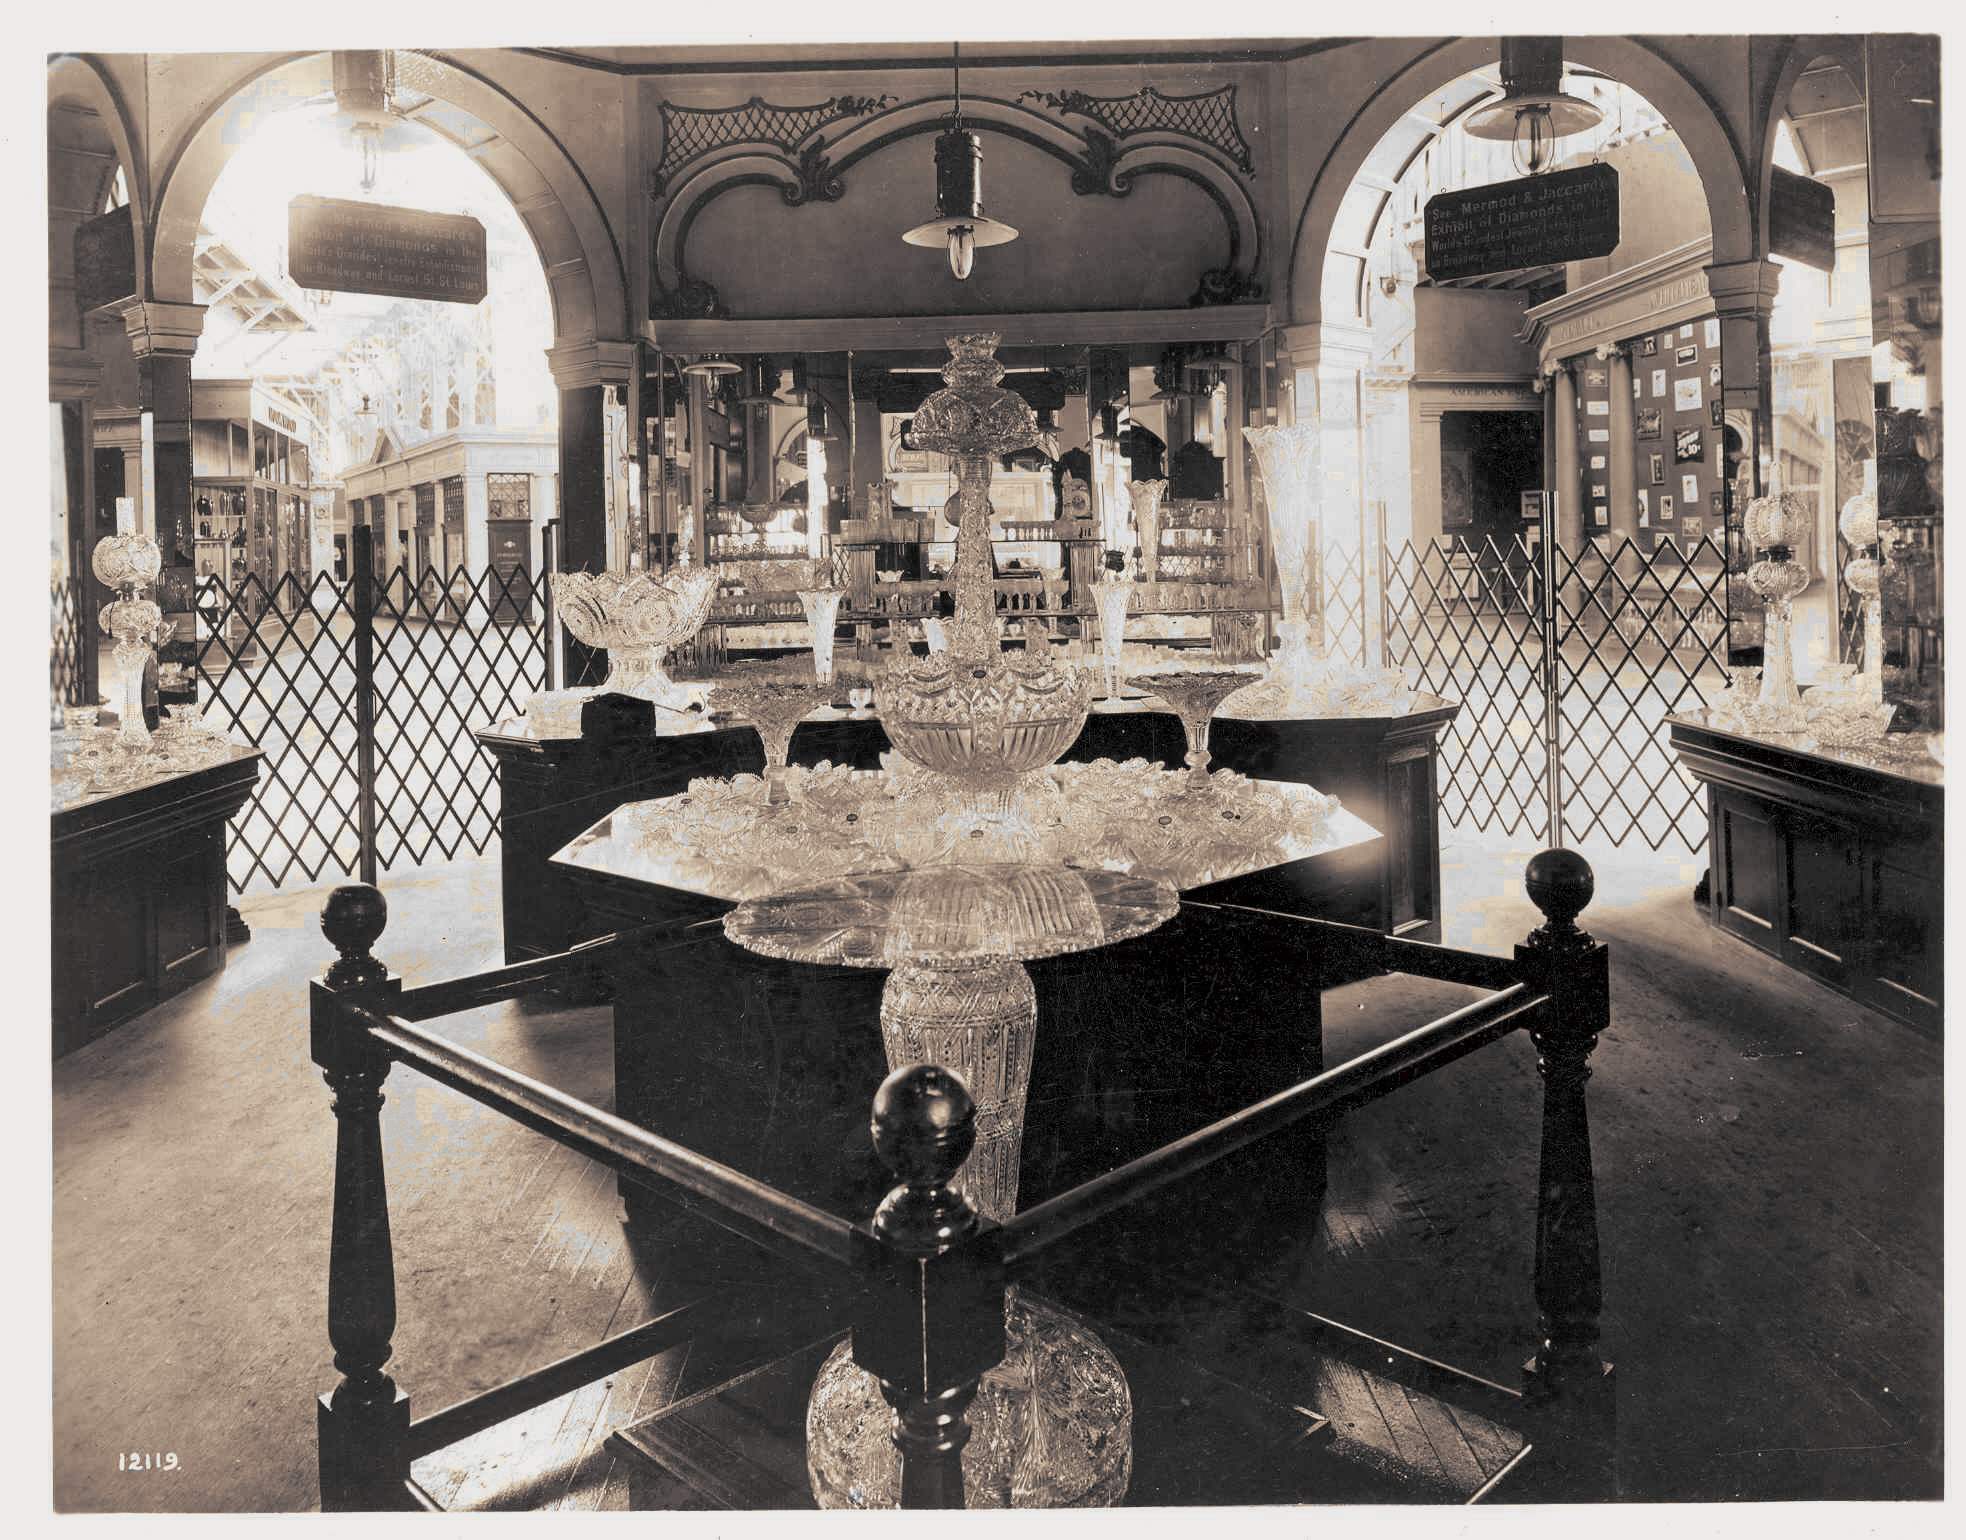 Libbey display at the 1904 World's Fair in St. Louis